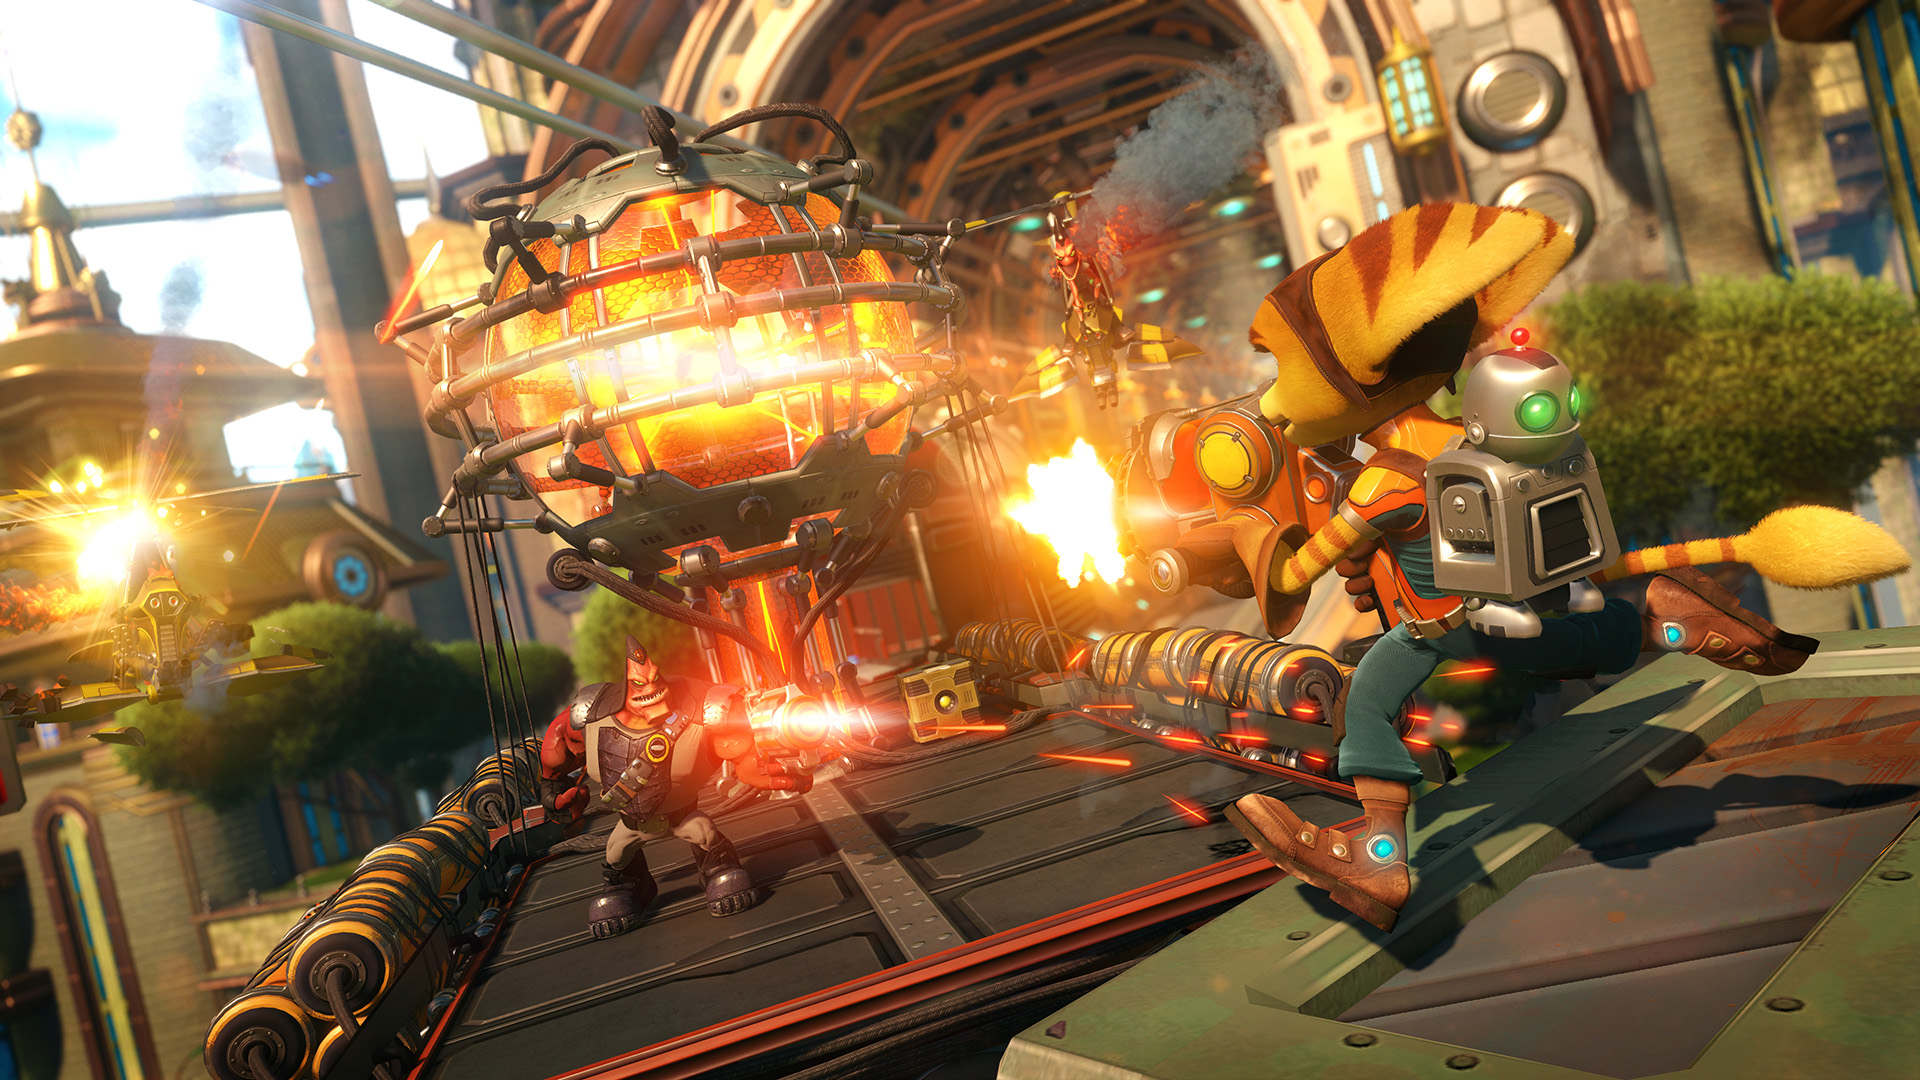 Ratchet & Clank review |